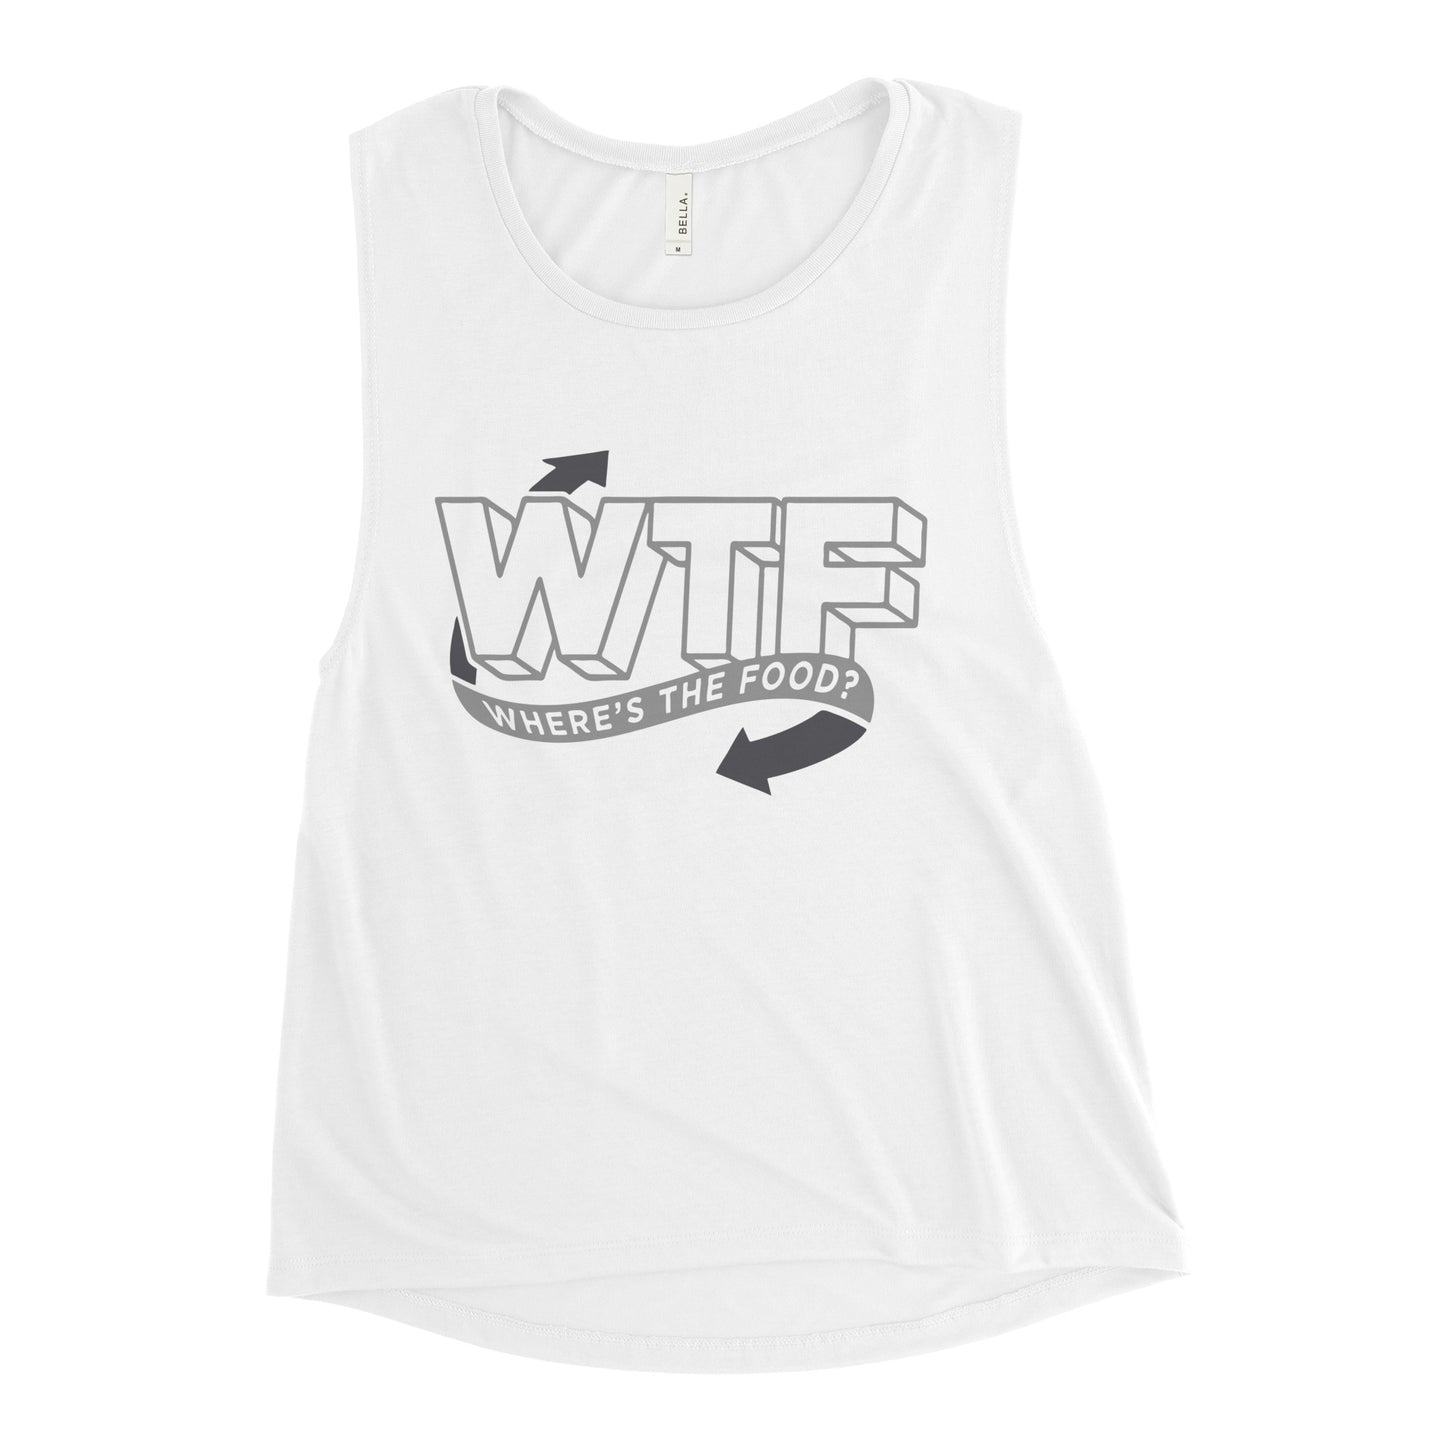 Where's The Food? Women's Muscle Tank